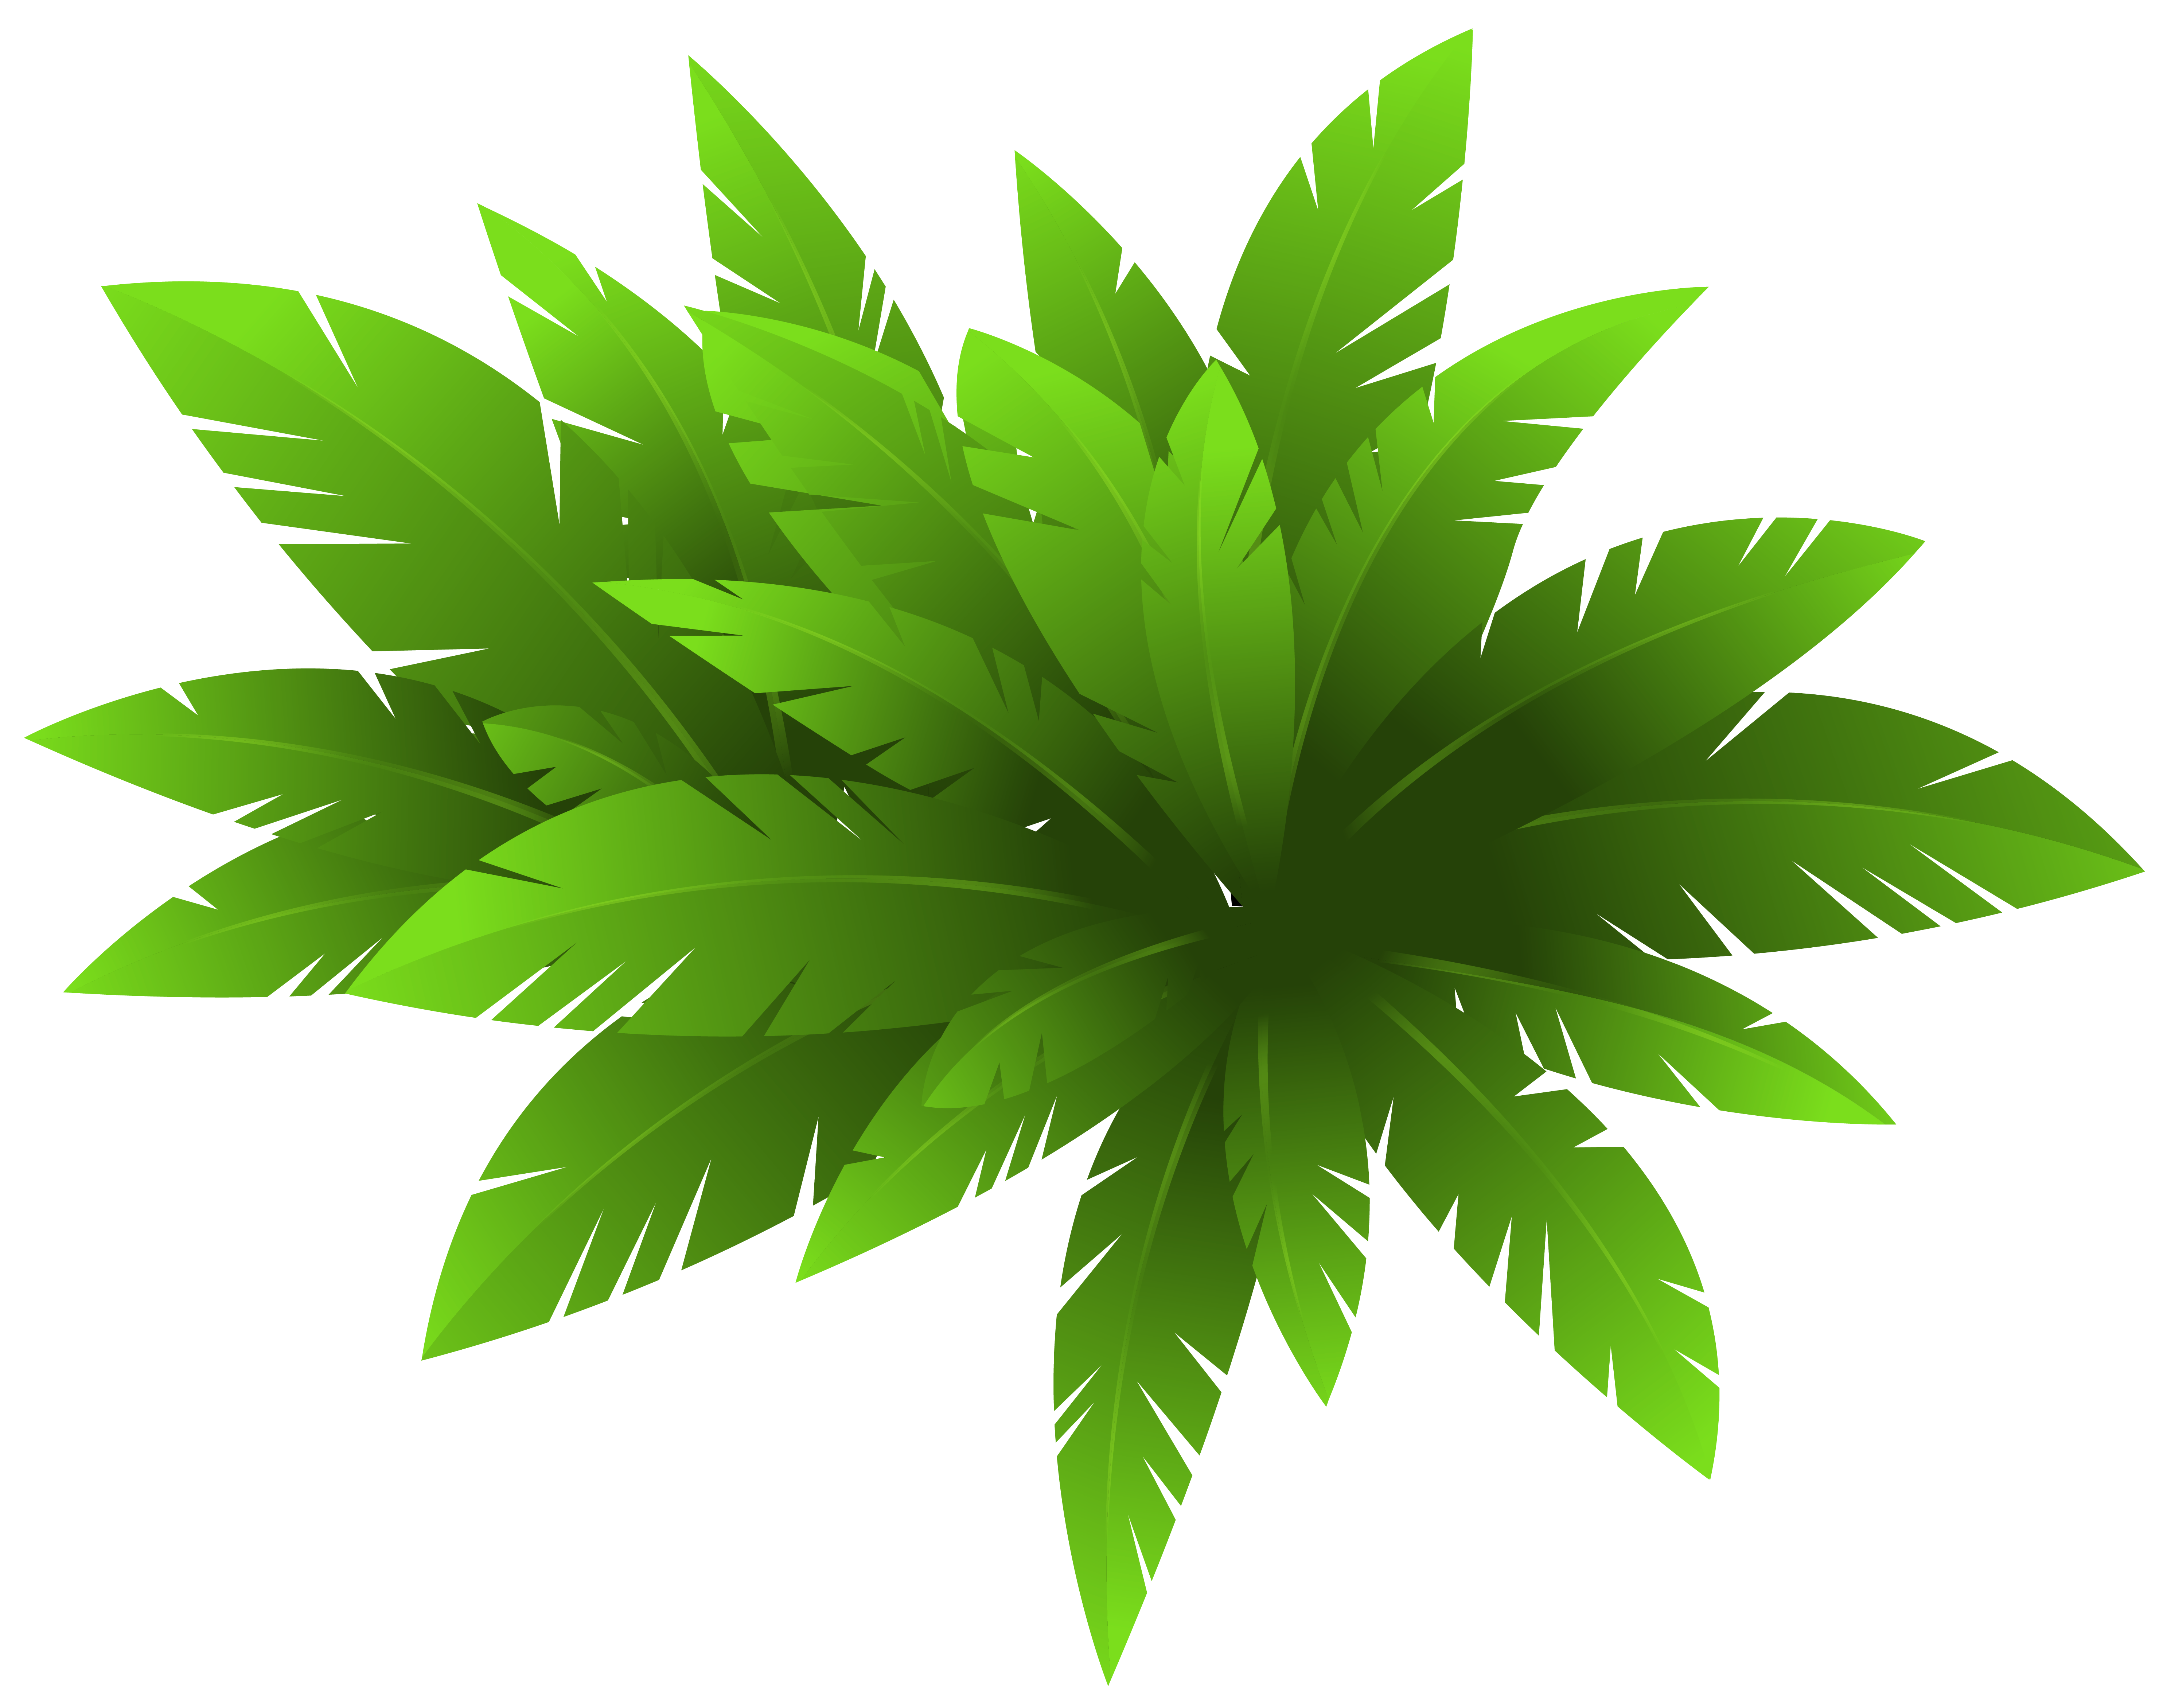 Green Plant Decoration PNG Clipart Image.